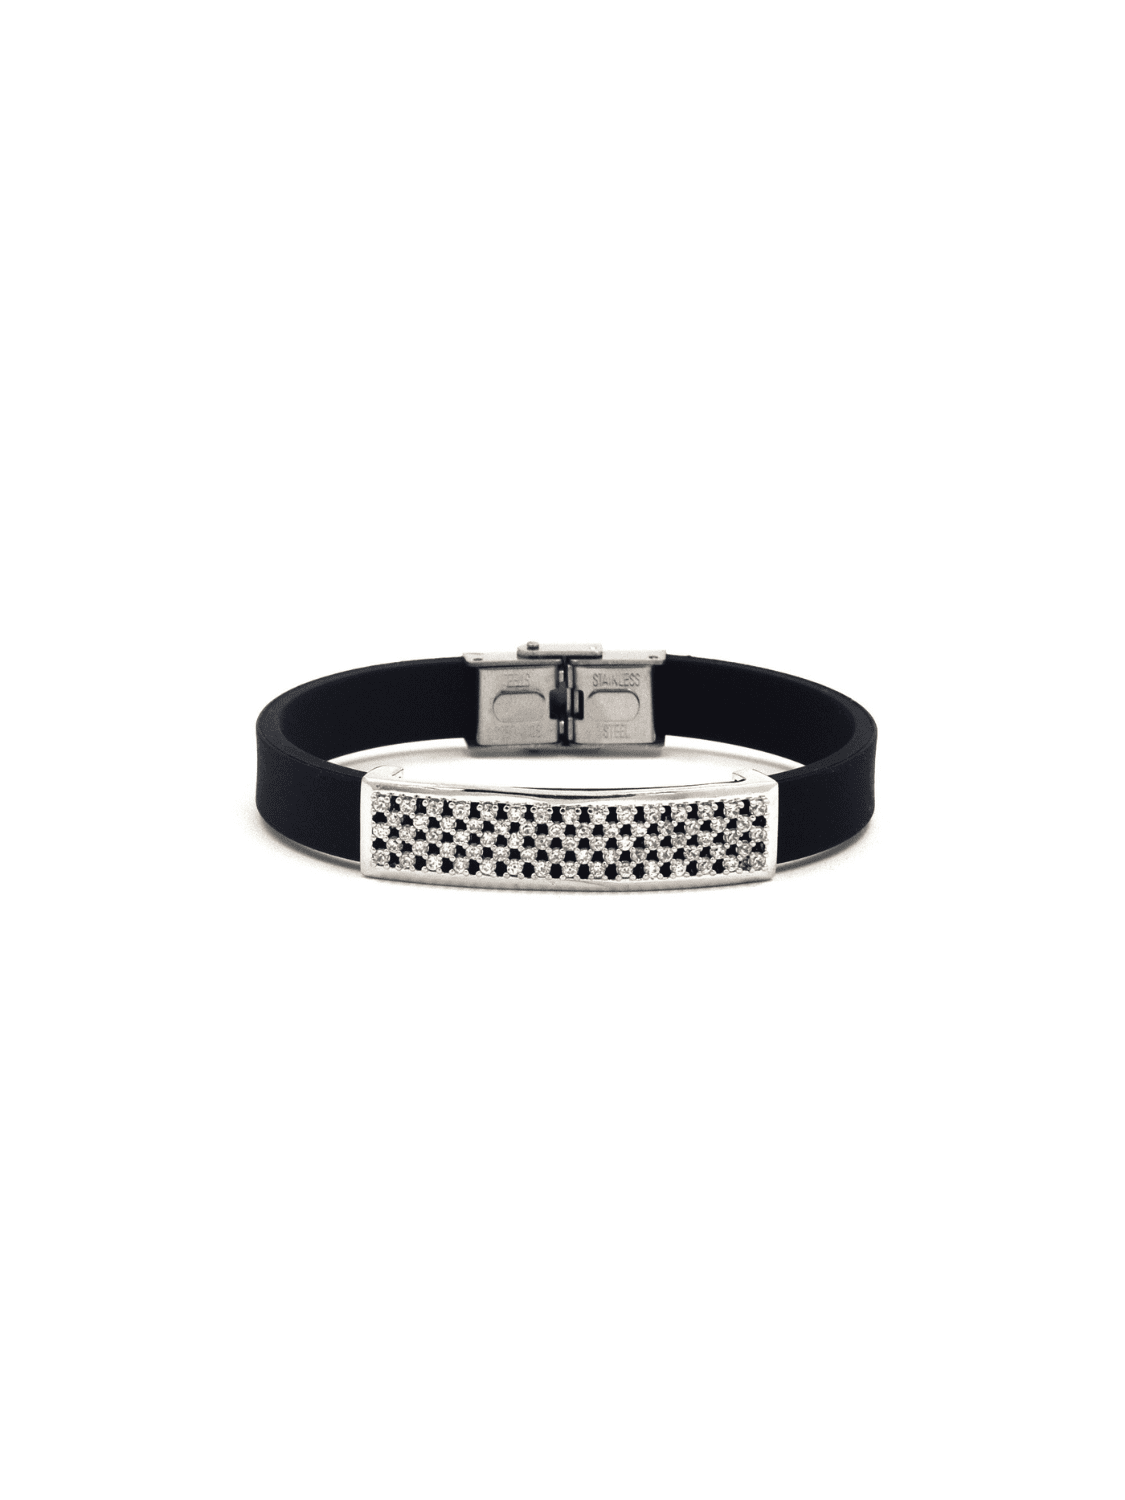 Onyx and Silver Toned Bracelet - QUEENS JEWELS